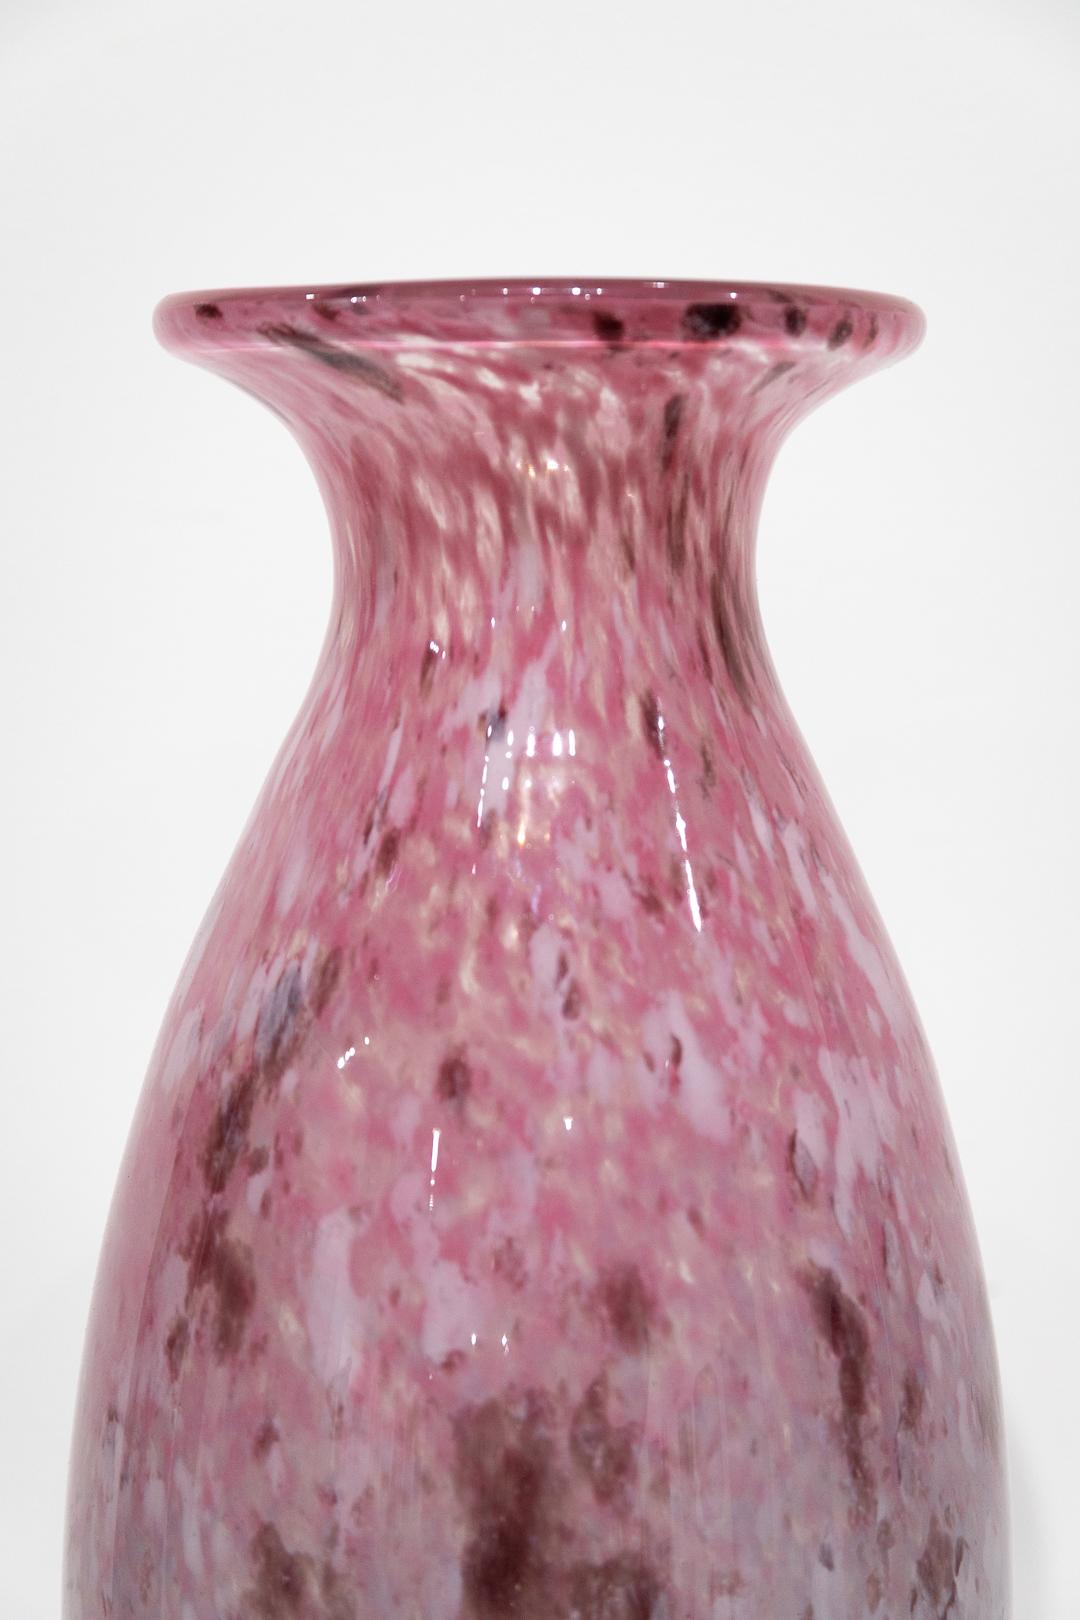 SALE ONE WEEK ONLY

This speckled and sparkling glass vase is an exemplary piece of the Art Nouveau period of France and was created by legendary glass-smith Charles Schneider. The pink and blue speckled and sparkling vase makes it an excellent